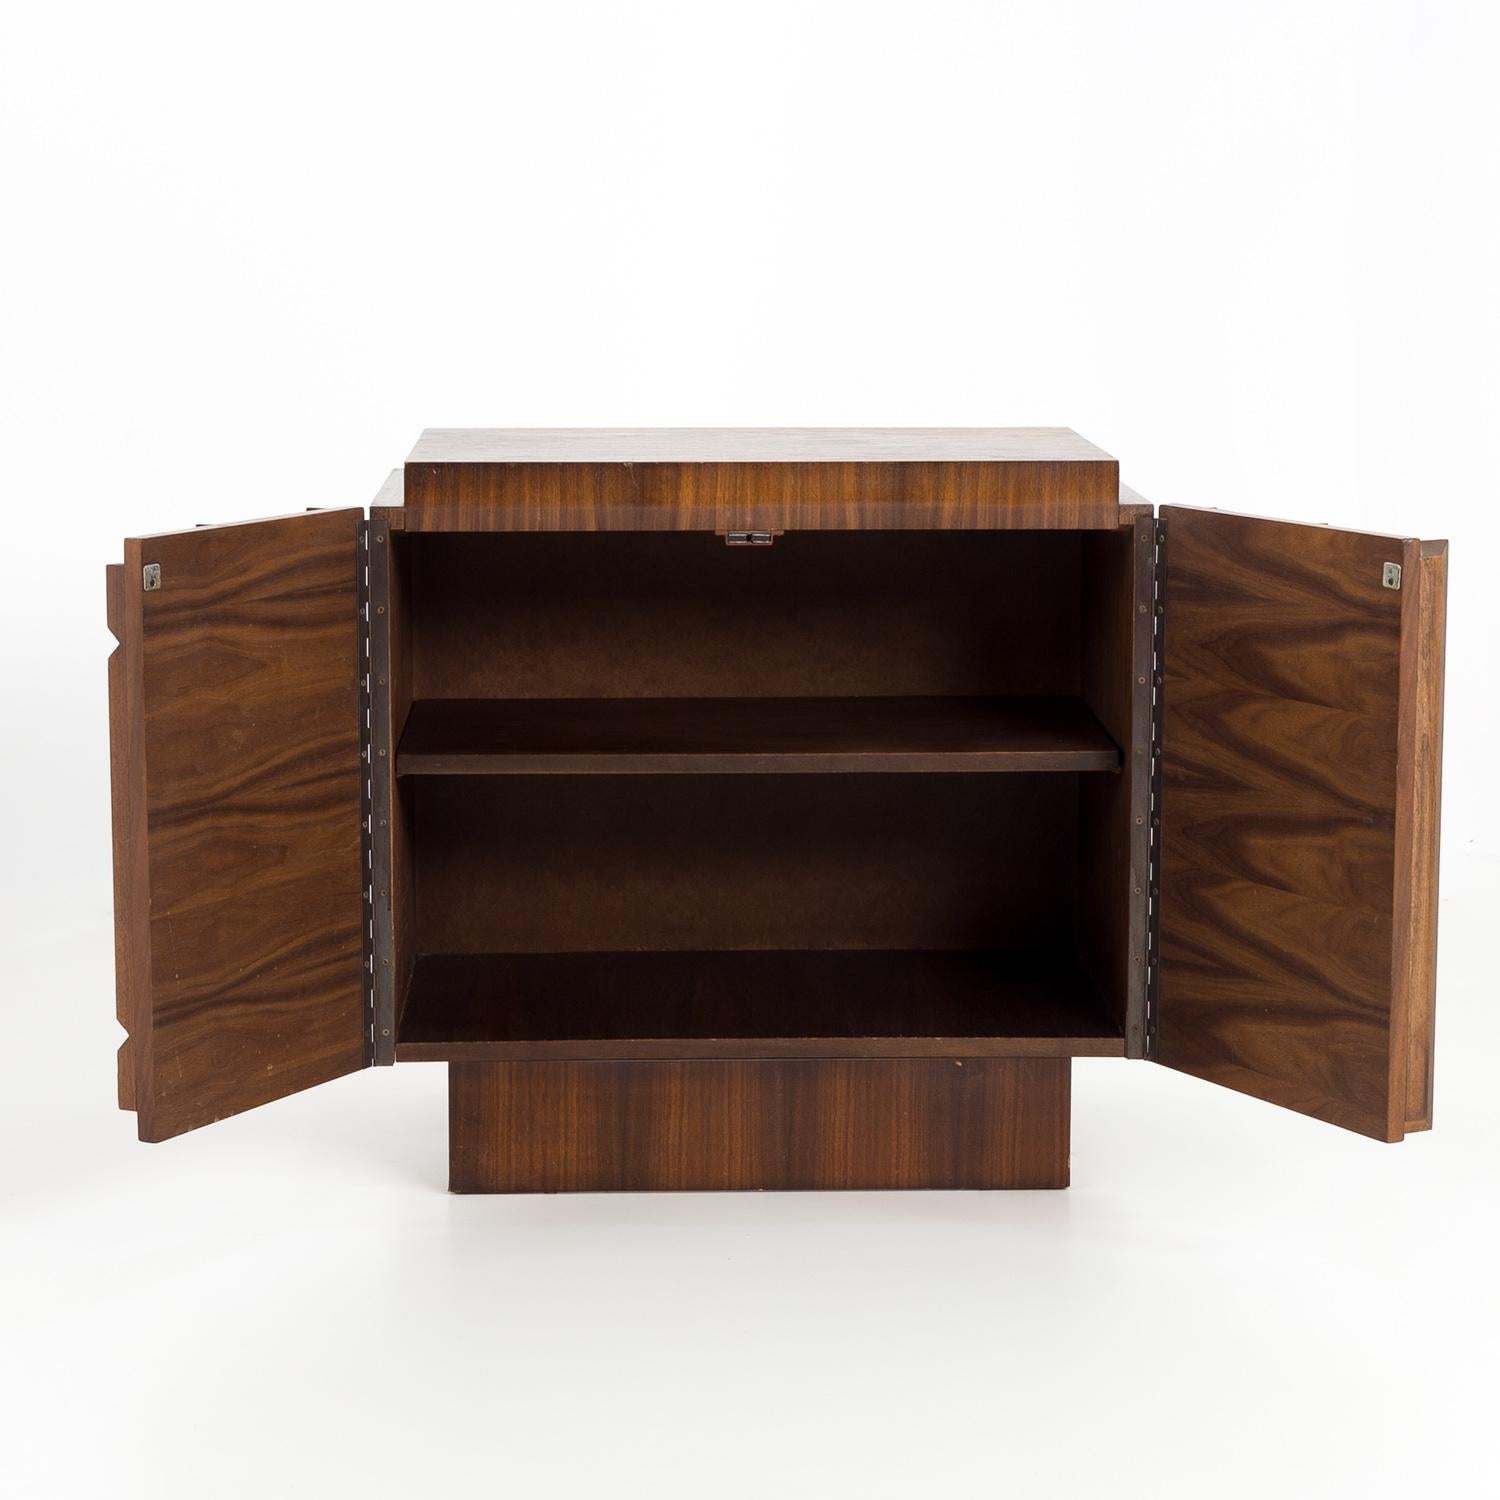 Tobago Brutalist mid century walnut nightstand

This nightstand measures: 26 wide x 18.5 deep x 25 inches high

All pieces of furniture can be had in what we call restored vintage condition. That means the piece is restored upon purchase so it’s